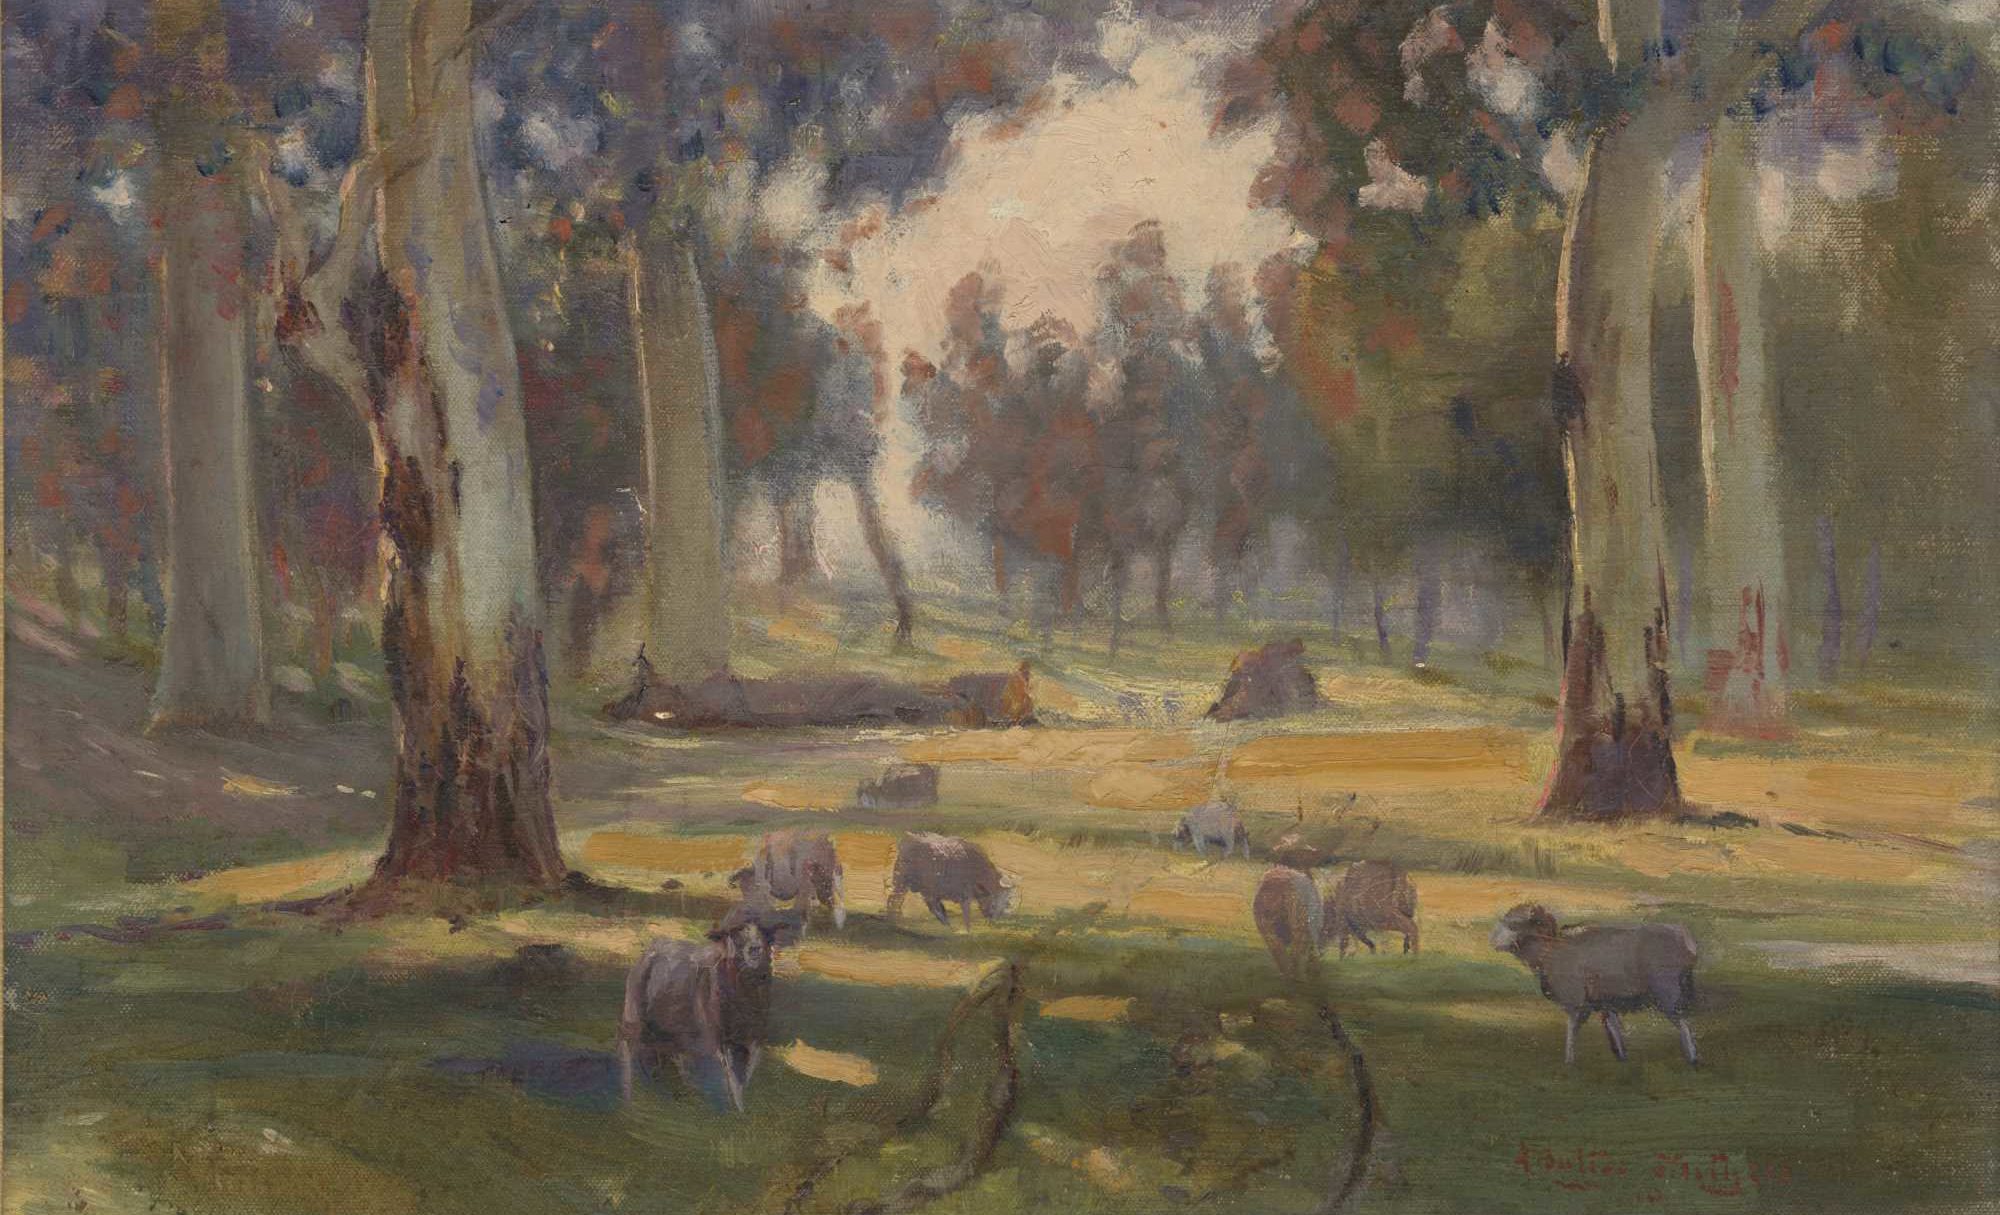 Walter WITHERS Born: Birmingham, England 1854; Arrived Australia 1882; Died: 1914 Sheep in shadows 1910 oil on canvas, 35.5 x 53.5 cm Benalla Art Gallery Collection Ledger Gift, 1980 1980.40